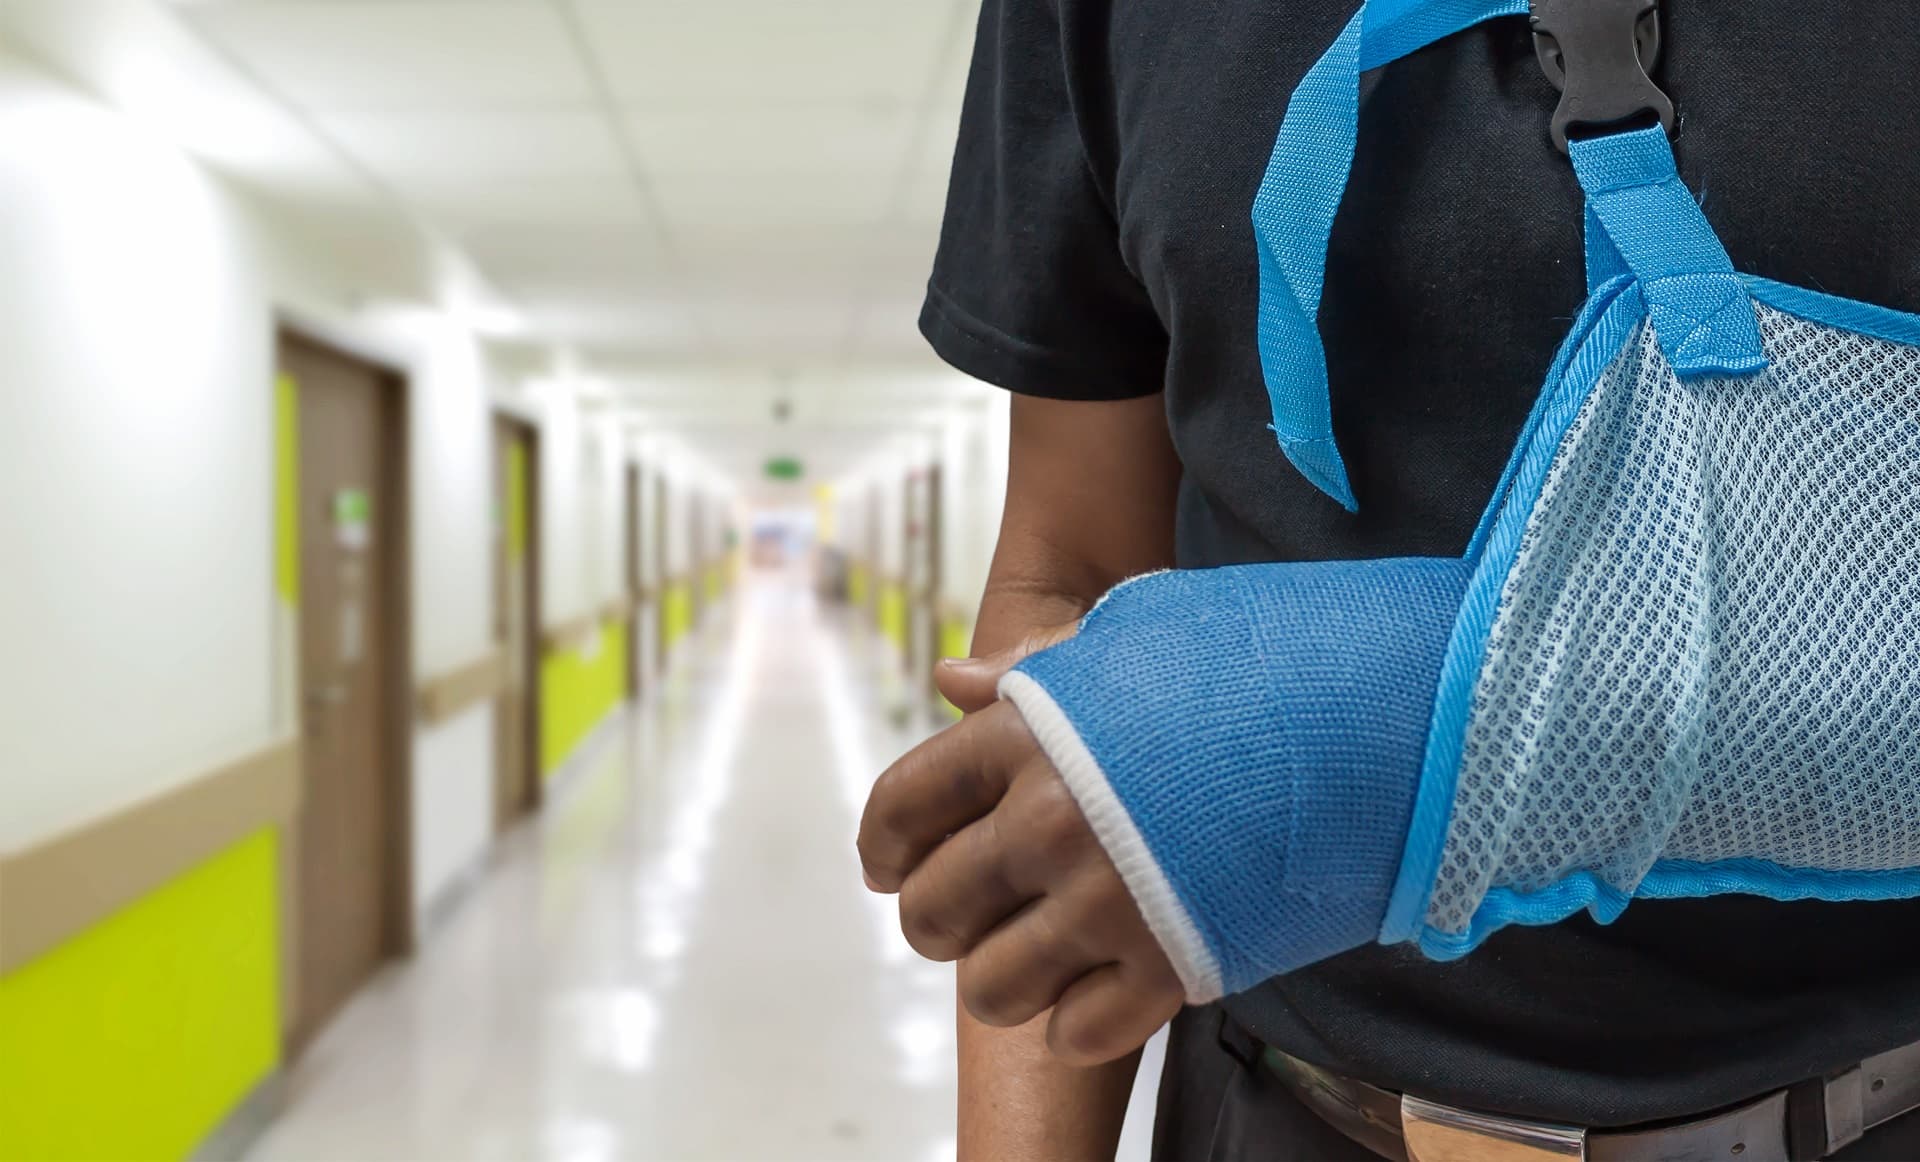 Man's arm in cast and sling with blurred hospital background